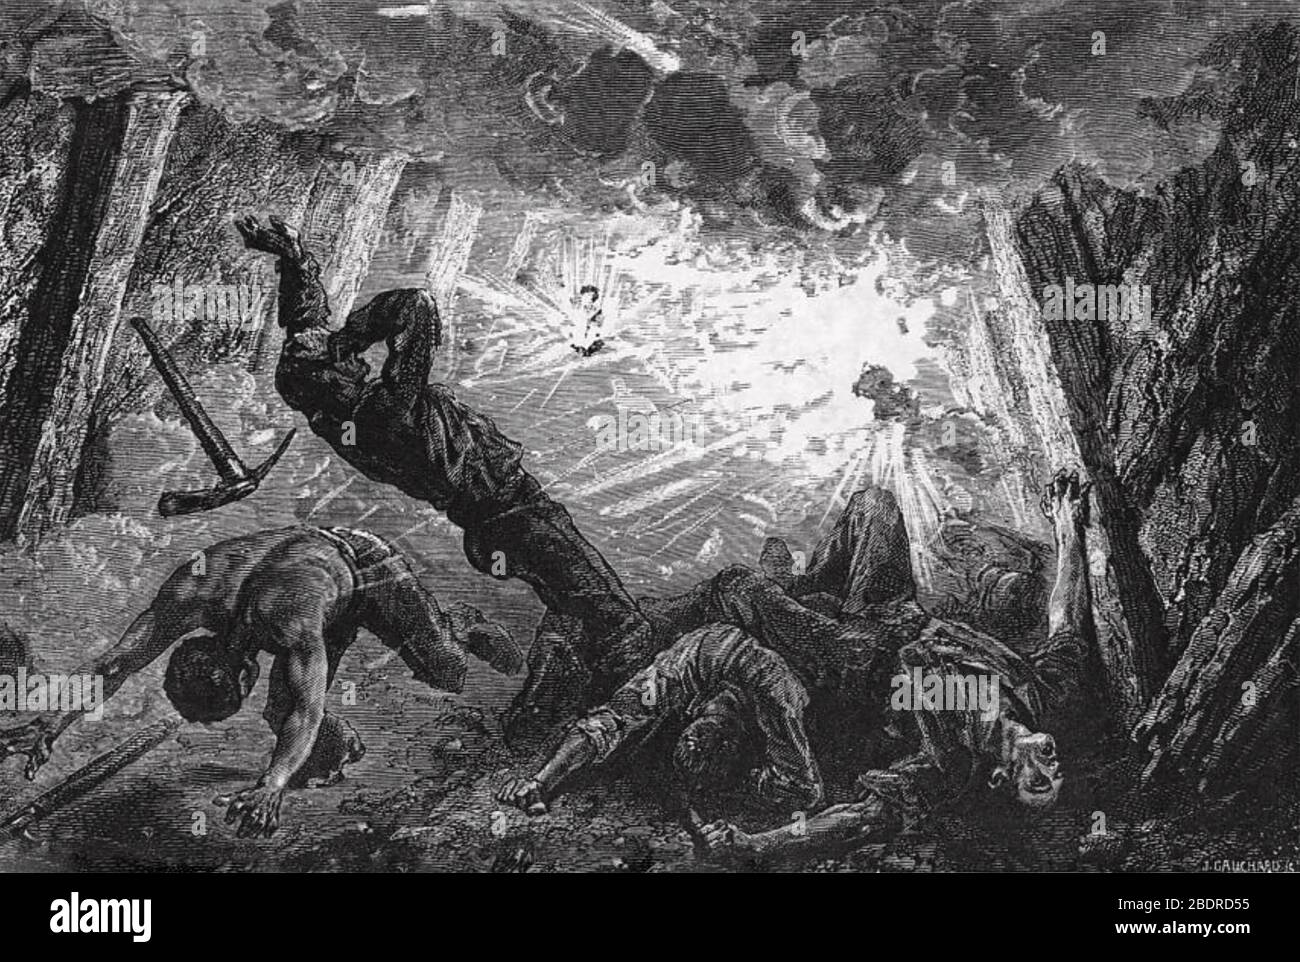 FIREDAMP EXPLOSION in a coal mine in 1860s. Stock Photo